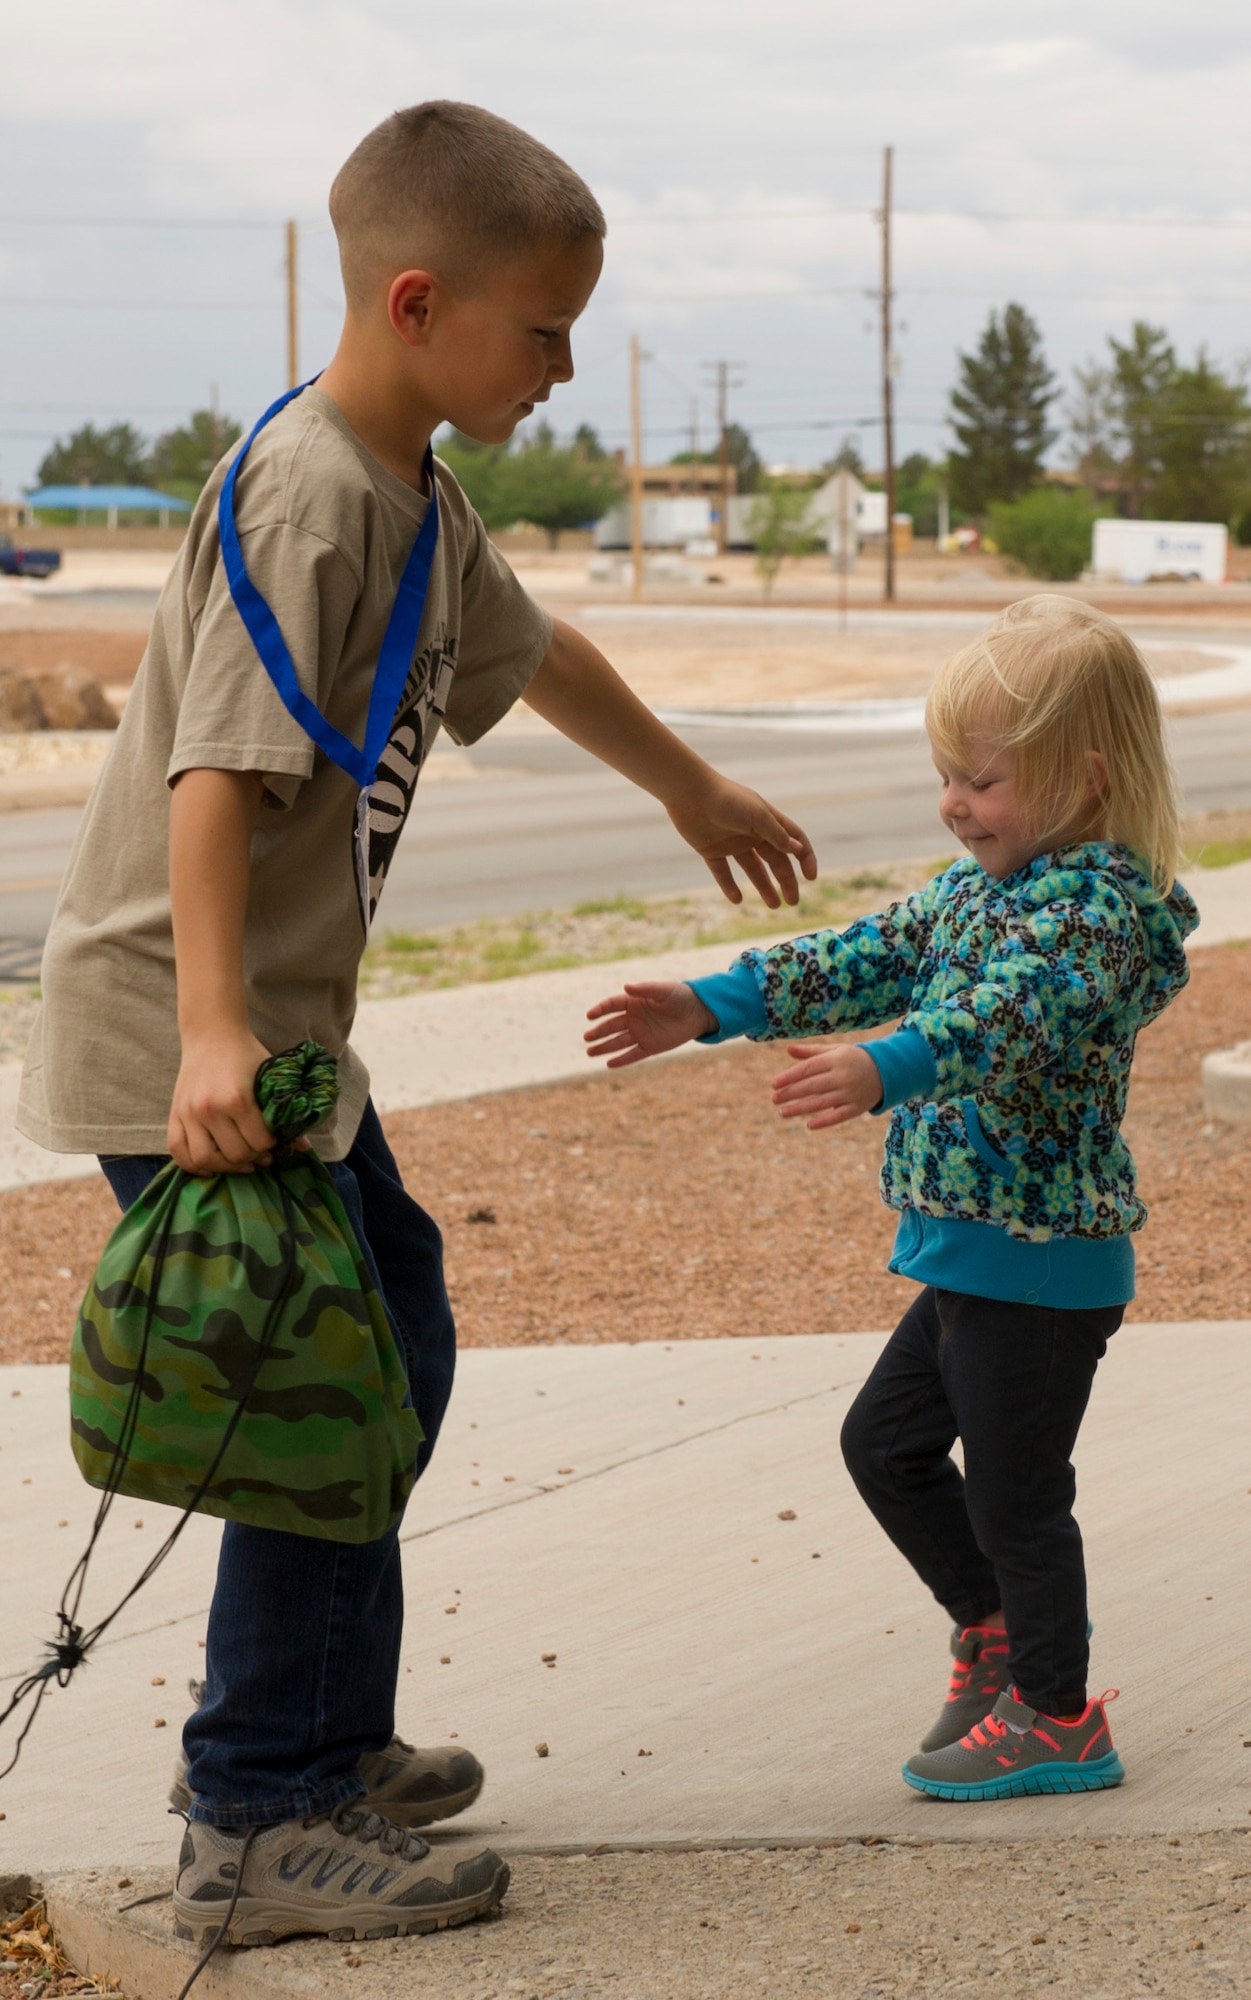 Talib Berry, 9, is greeted by his younger sister Taeryn, 2, after returning from Operation K.I.D. (Kids Investigating Deployment), April 8 at Holloman Air Force Base, N.M.  This is Talib’s second year participating in Operation K.I.D. Each year, the Airmen and Family Readiness Center and the Youth Center host Operation K.I.D. in April, the Month of the Military Child. The A&FRC believes that it is important for children to experience what their parents go through during a deployment.